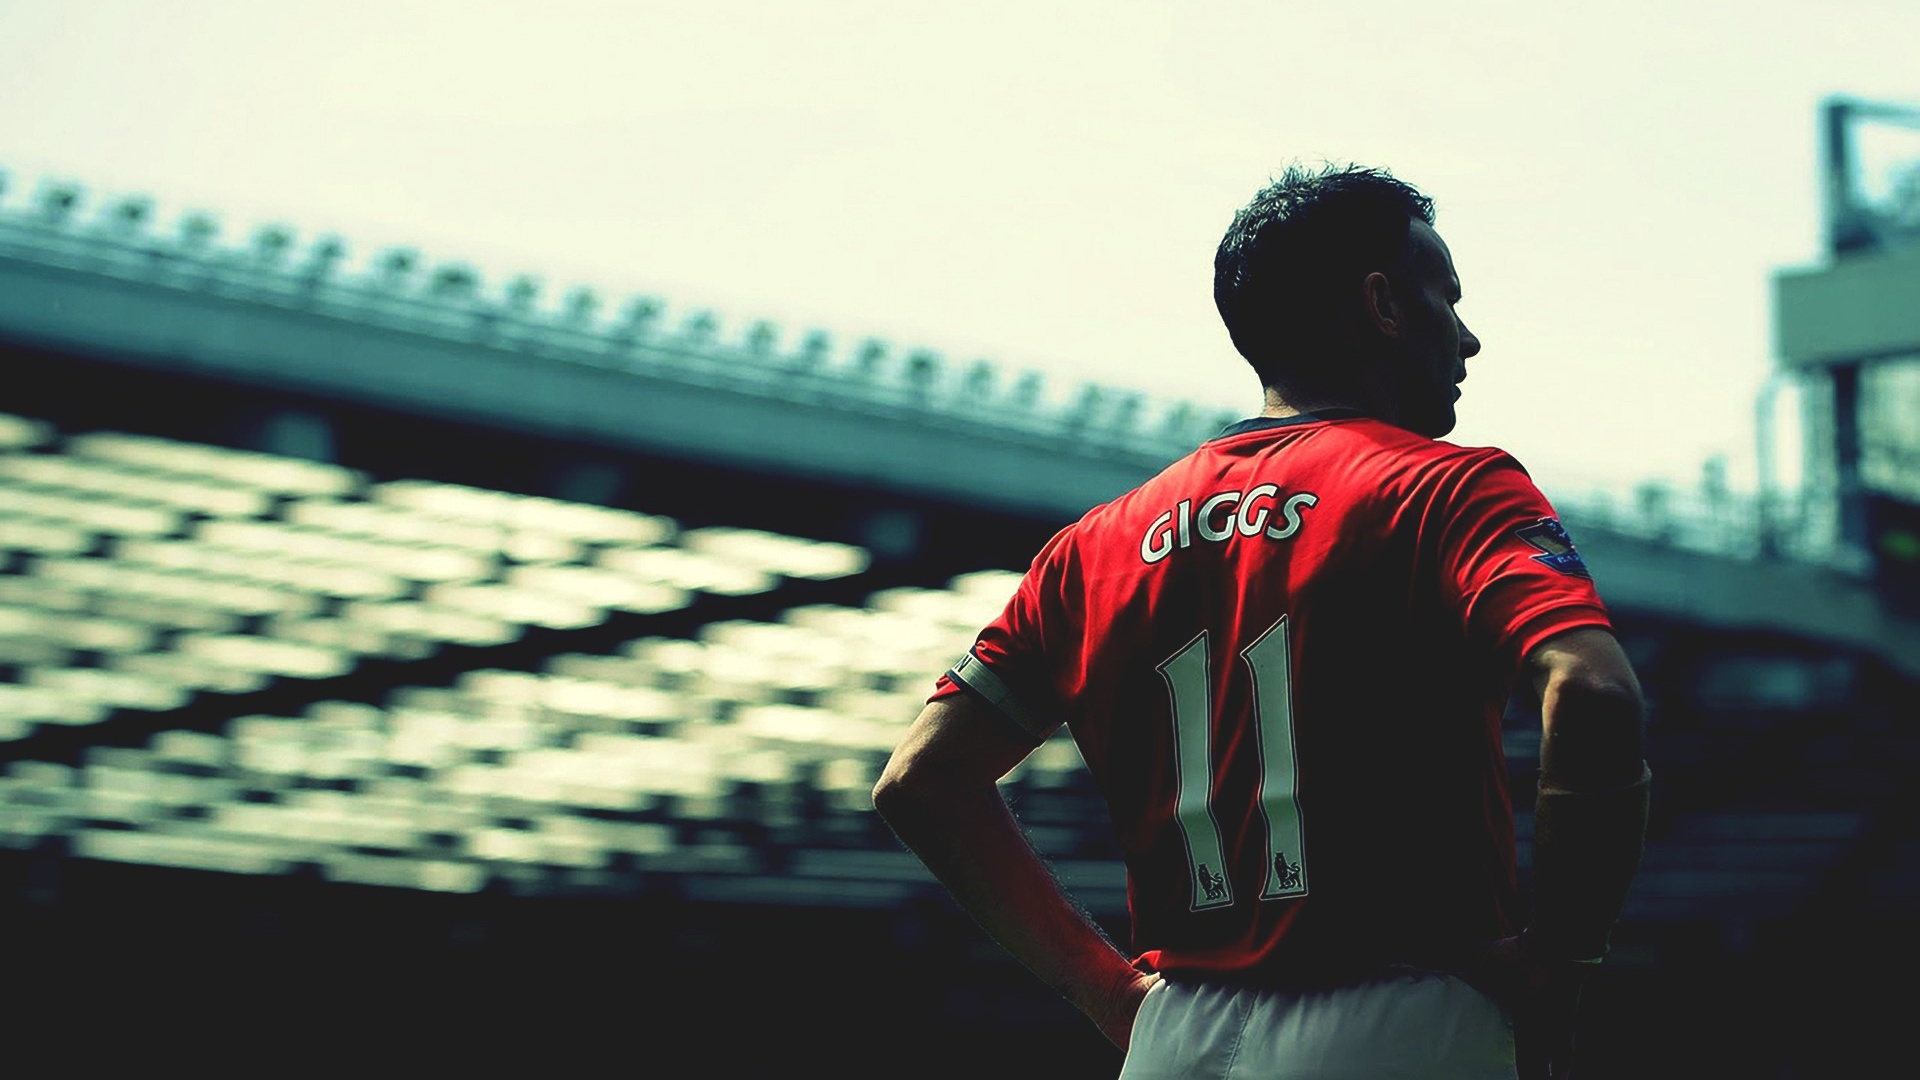 Ryan Giggs Manchester United Wallpaper In Resolution